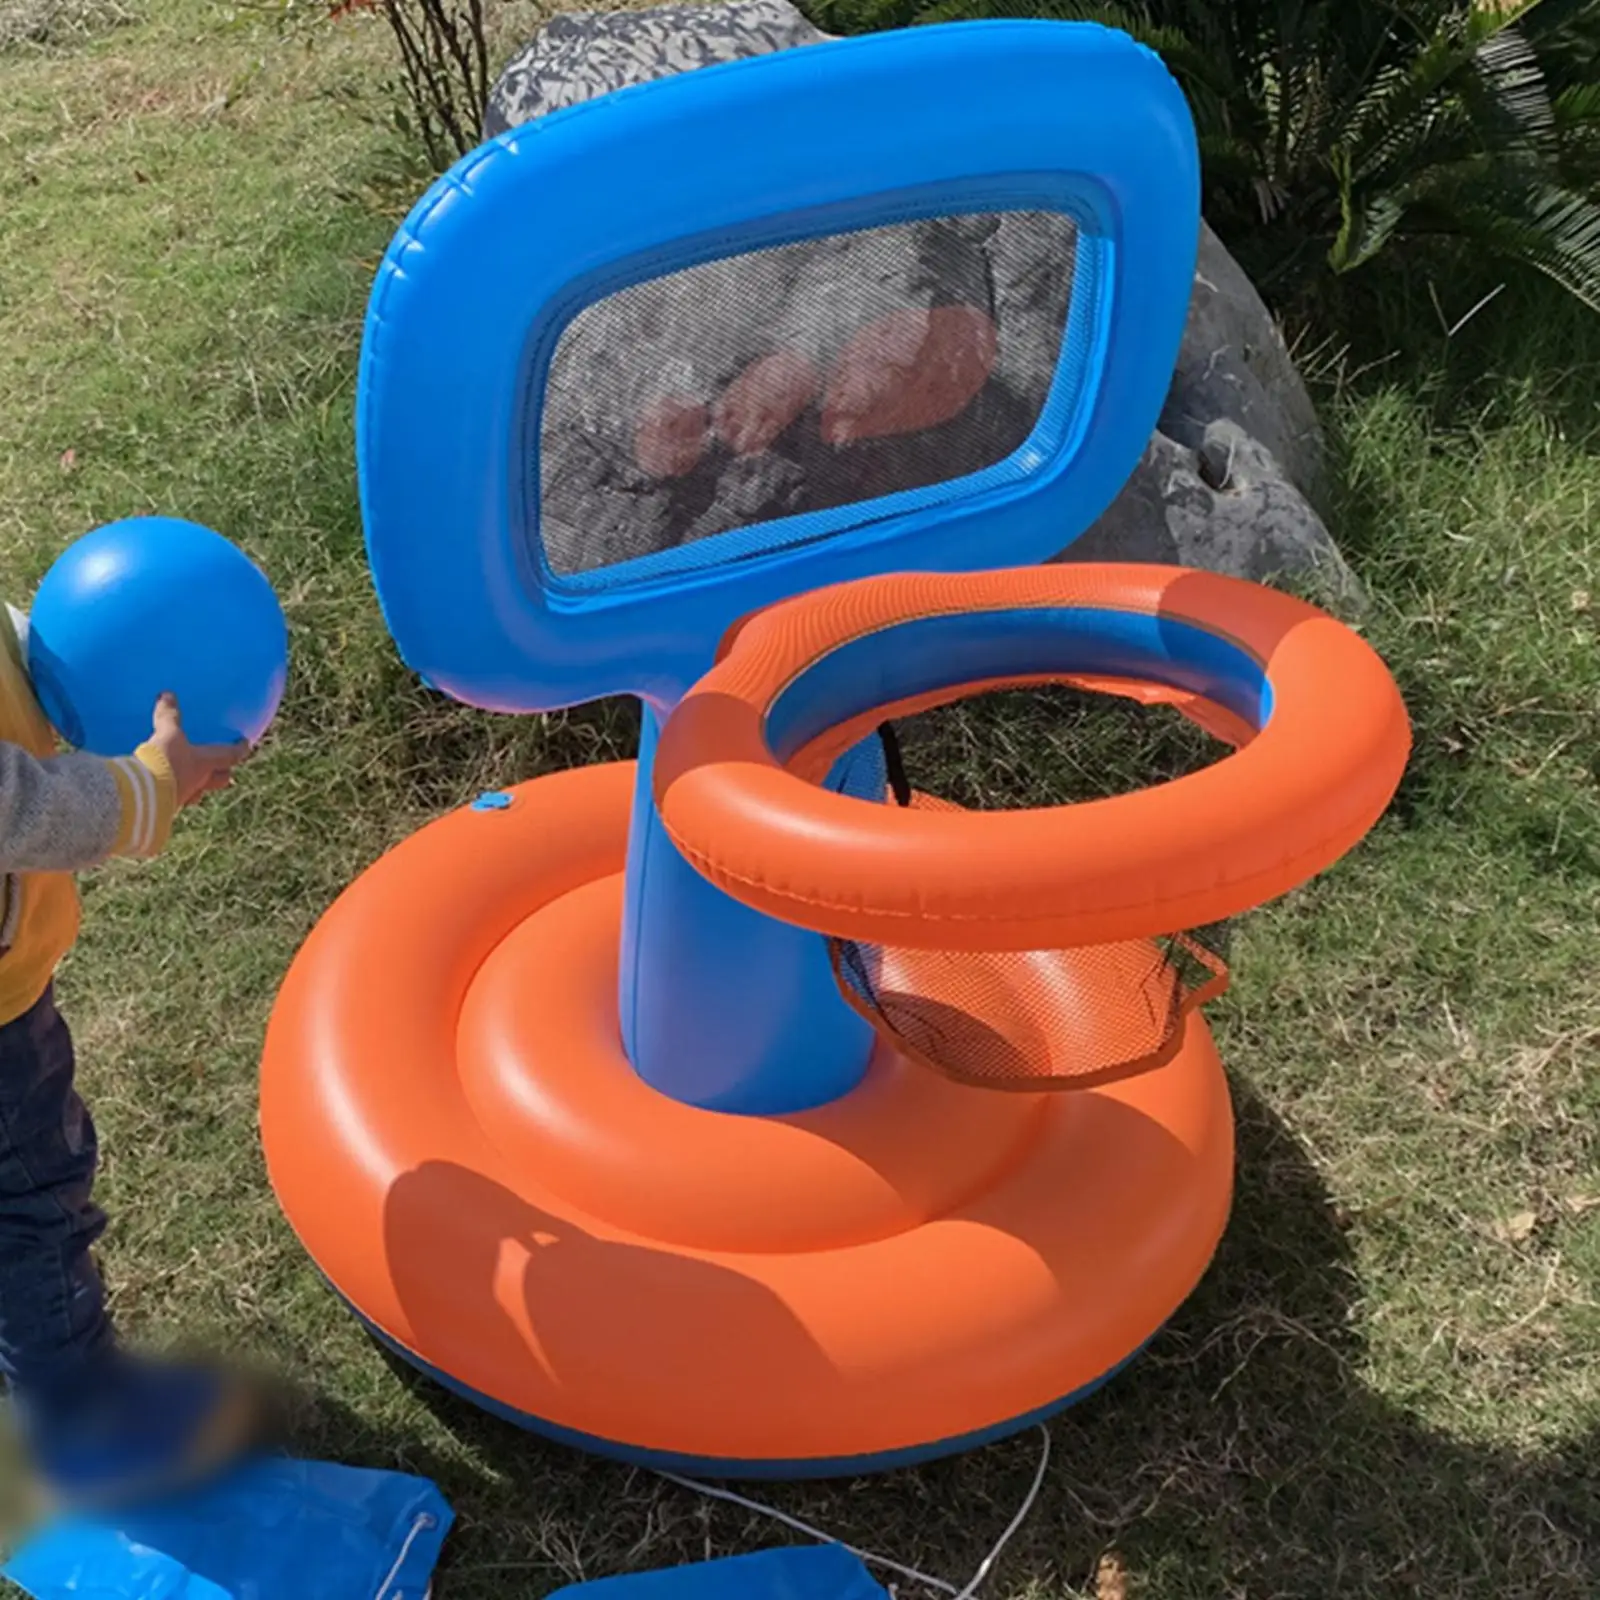 Funny Inflatable Pools Basketball Hoop Swimming Floating Hoop Beach with Ball Birthday Gifts Playing for Garden, Lake Ocean